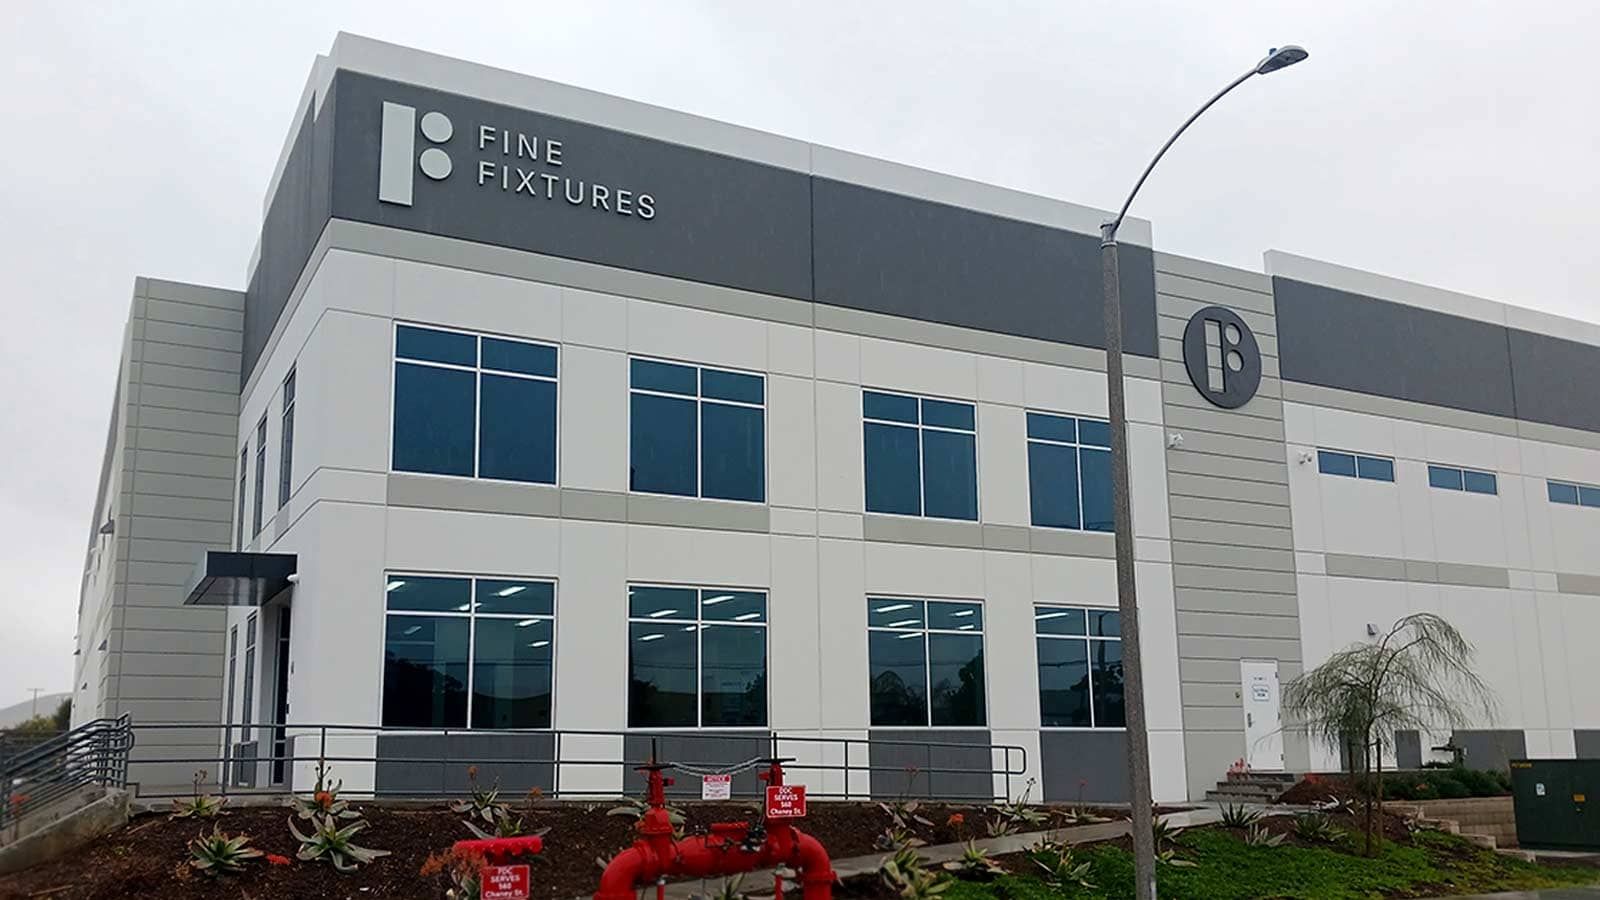 Fine Fixtures outdoor signs installation on the building top